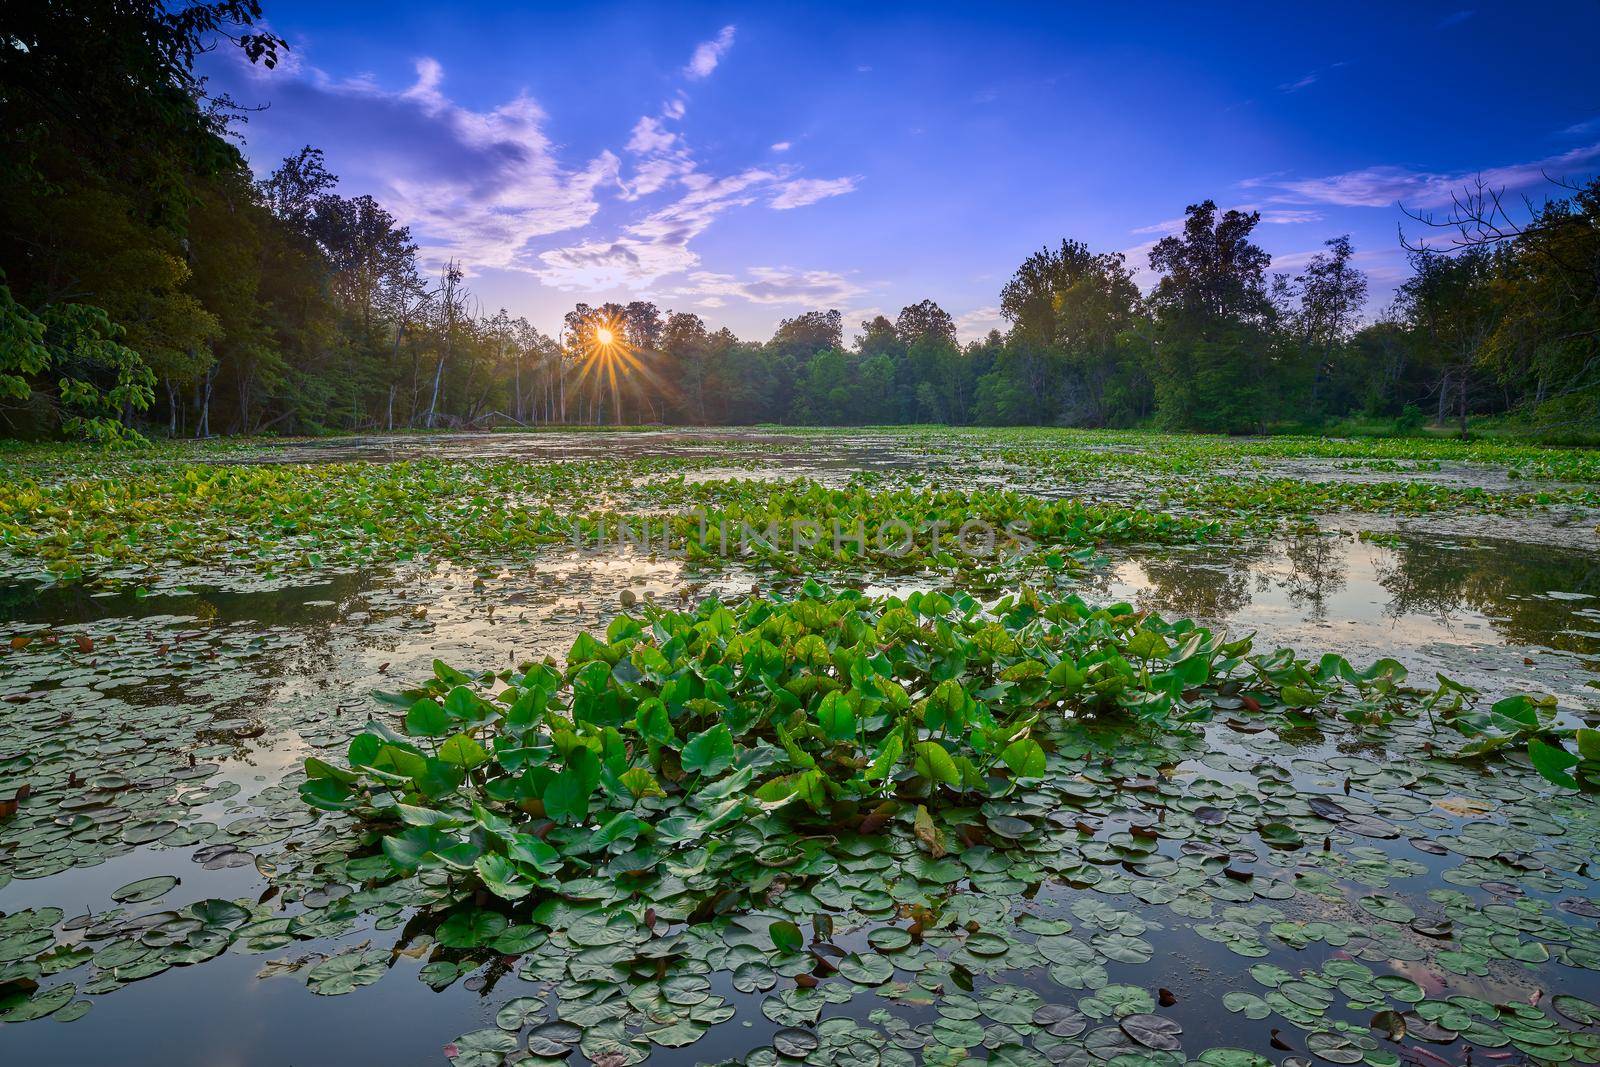 Sunrise over a pond filled with water lilies. by patrickstock